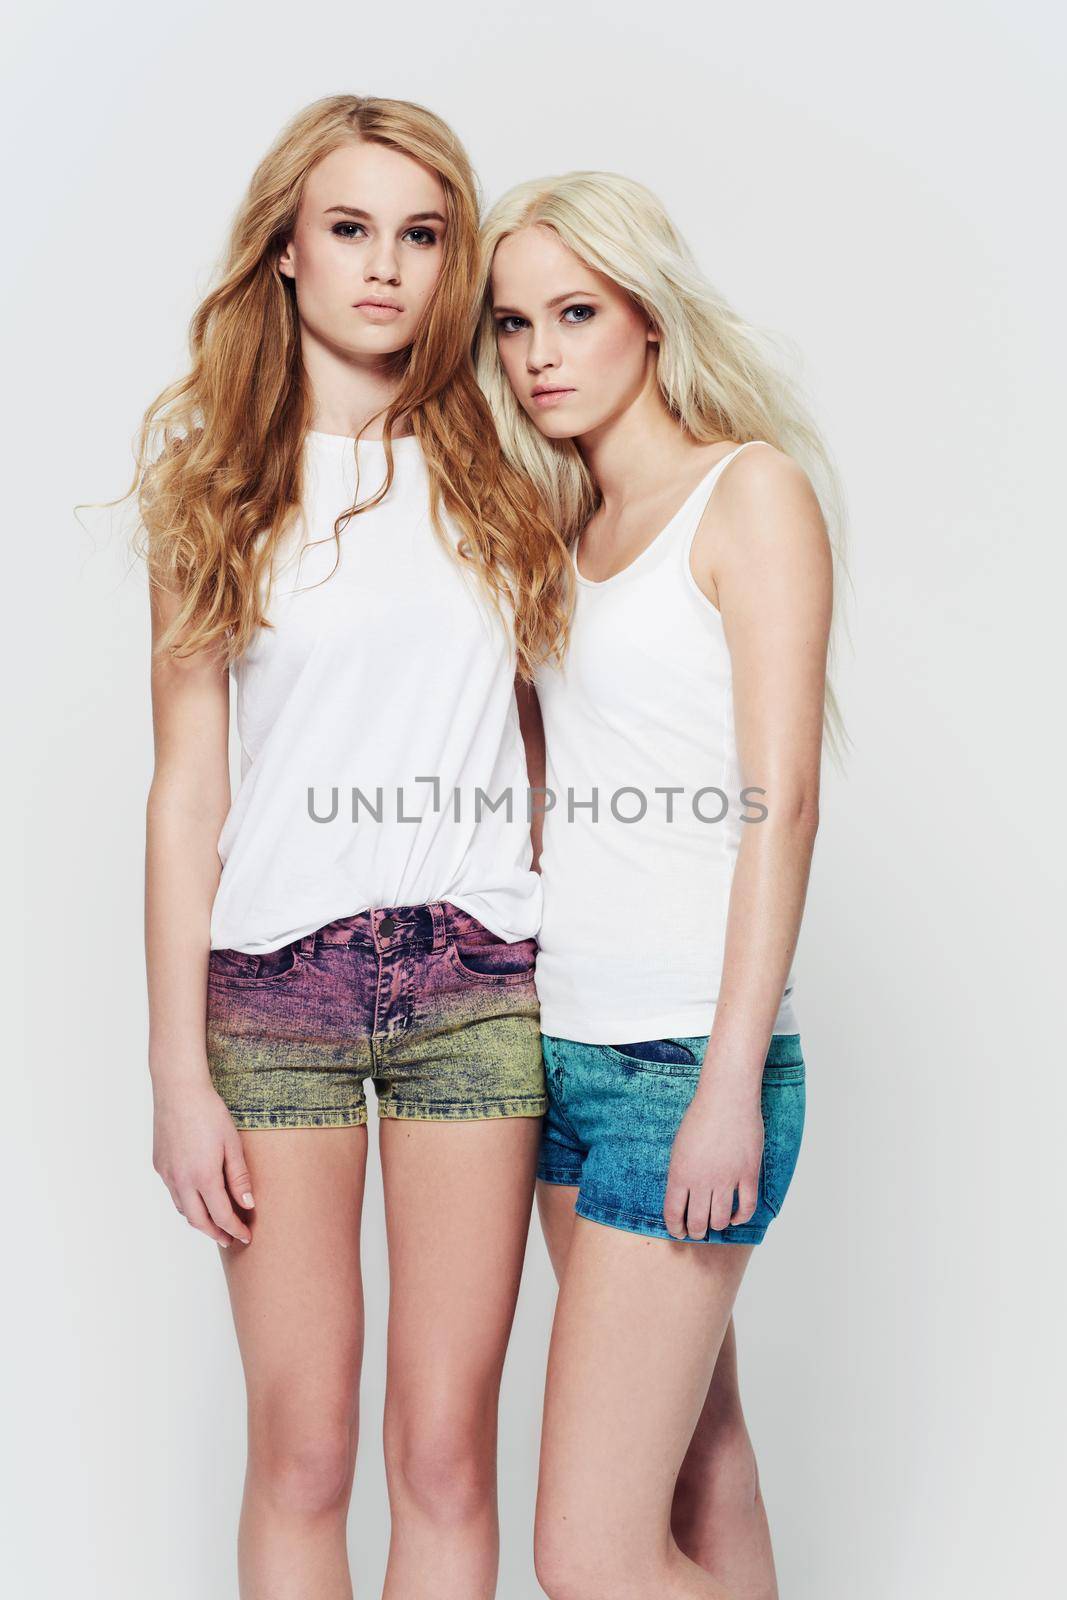 Effortless natural beauty and style. Studio portrait of two young models against a white background. by YuriArcurs